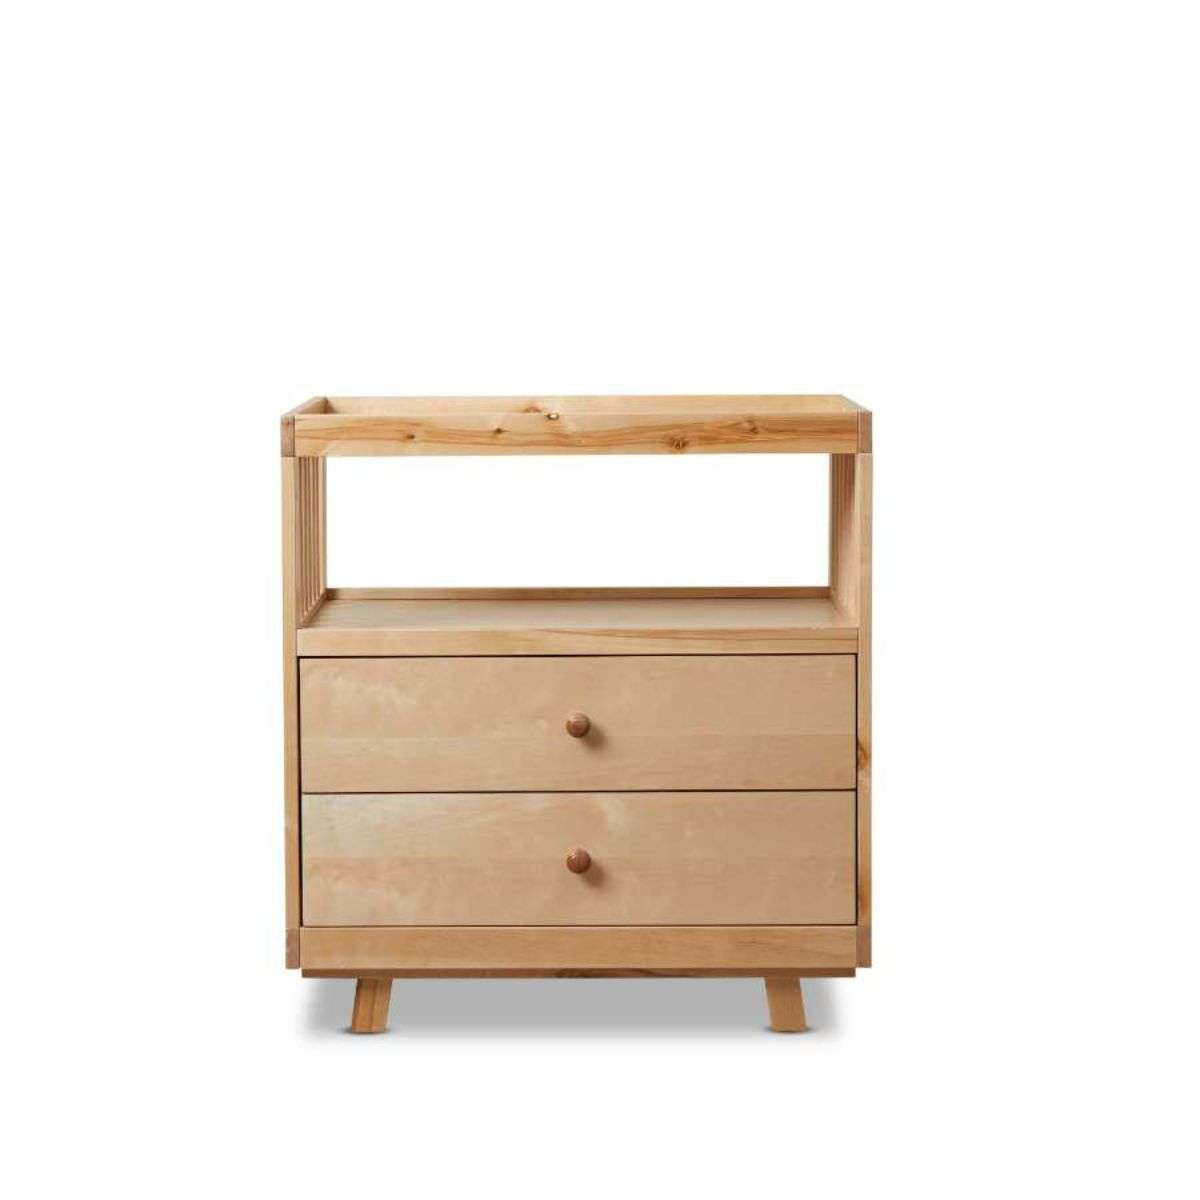 Aspen Change Table with Drawers - Birch